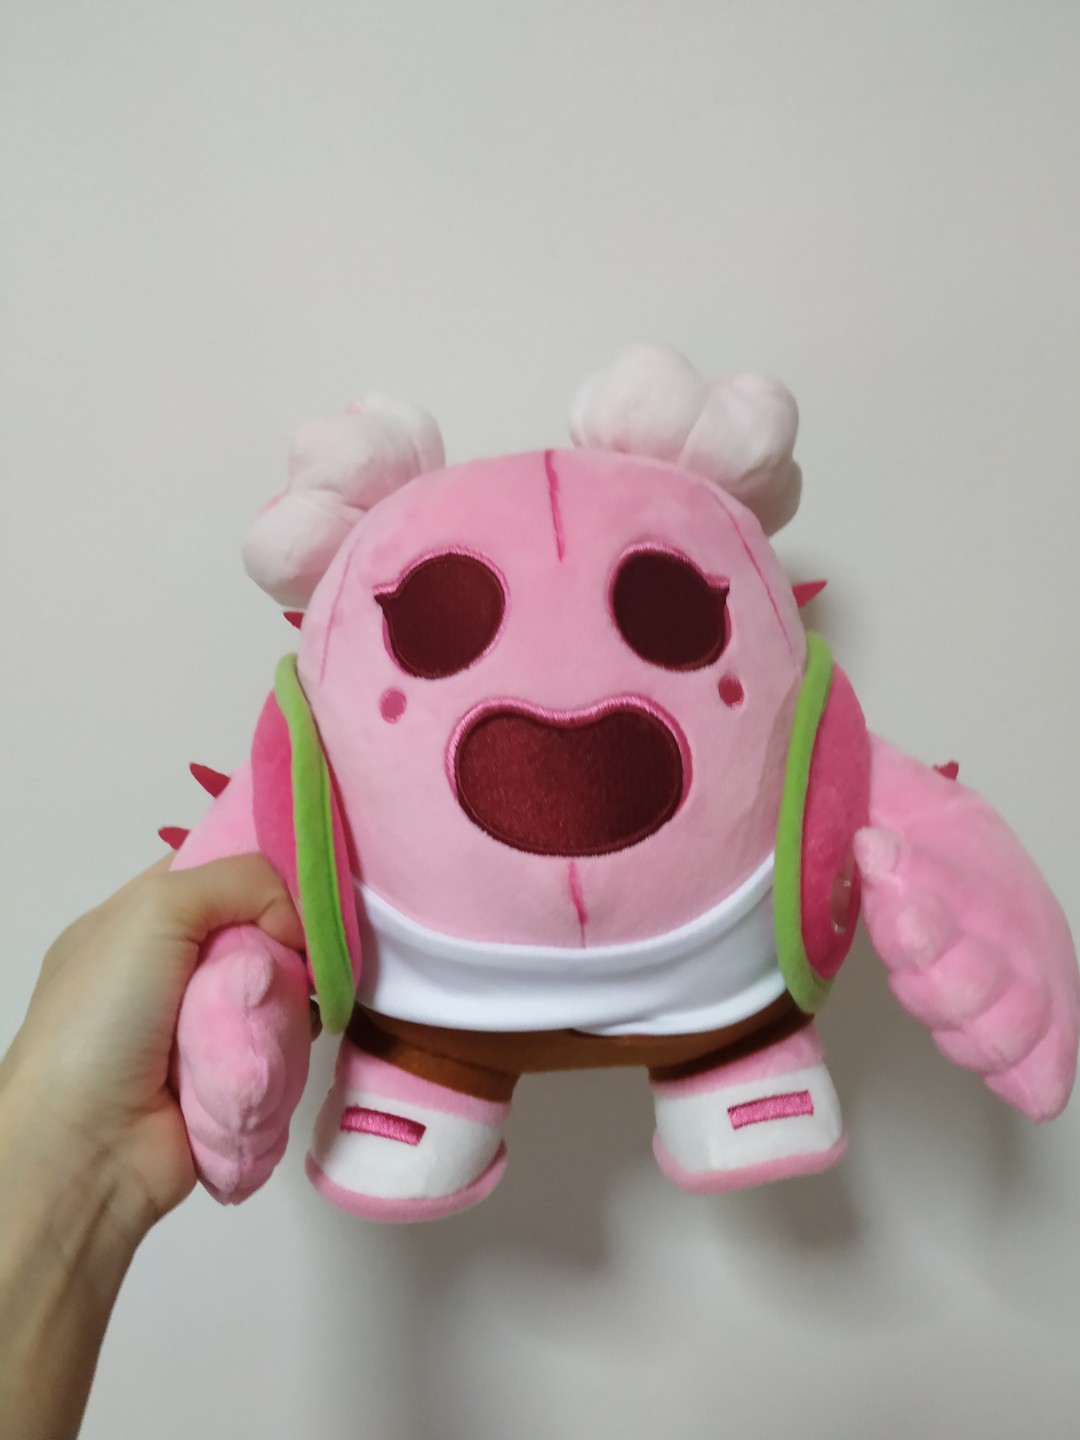 Sakura Spike Brawl Stars Plush Toy Official Tournament Limited Edition  Supercell